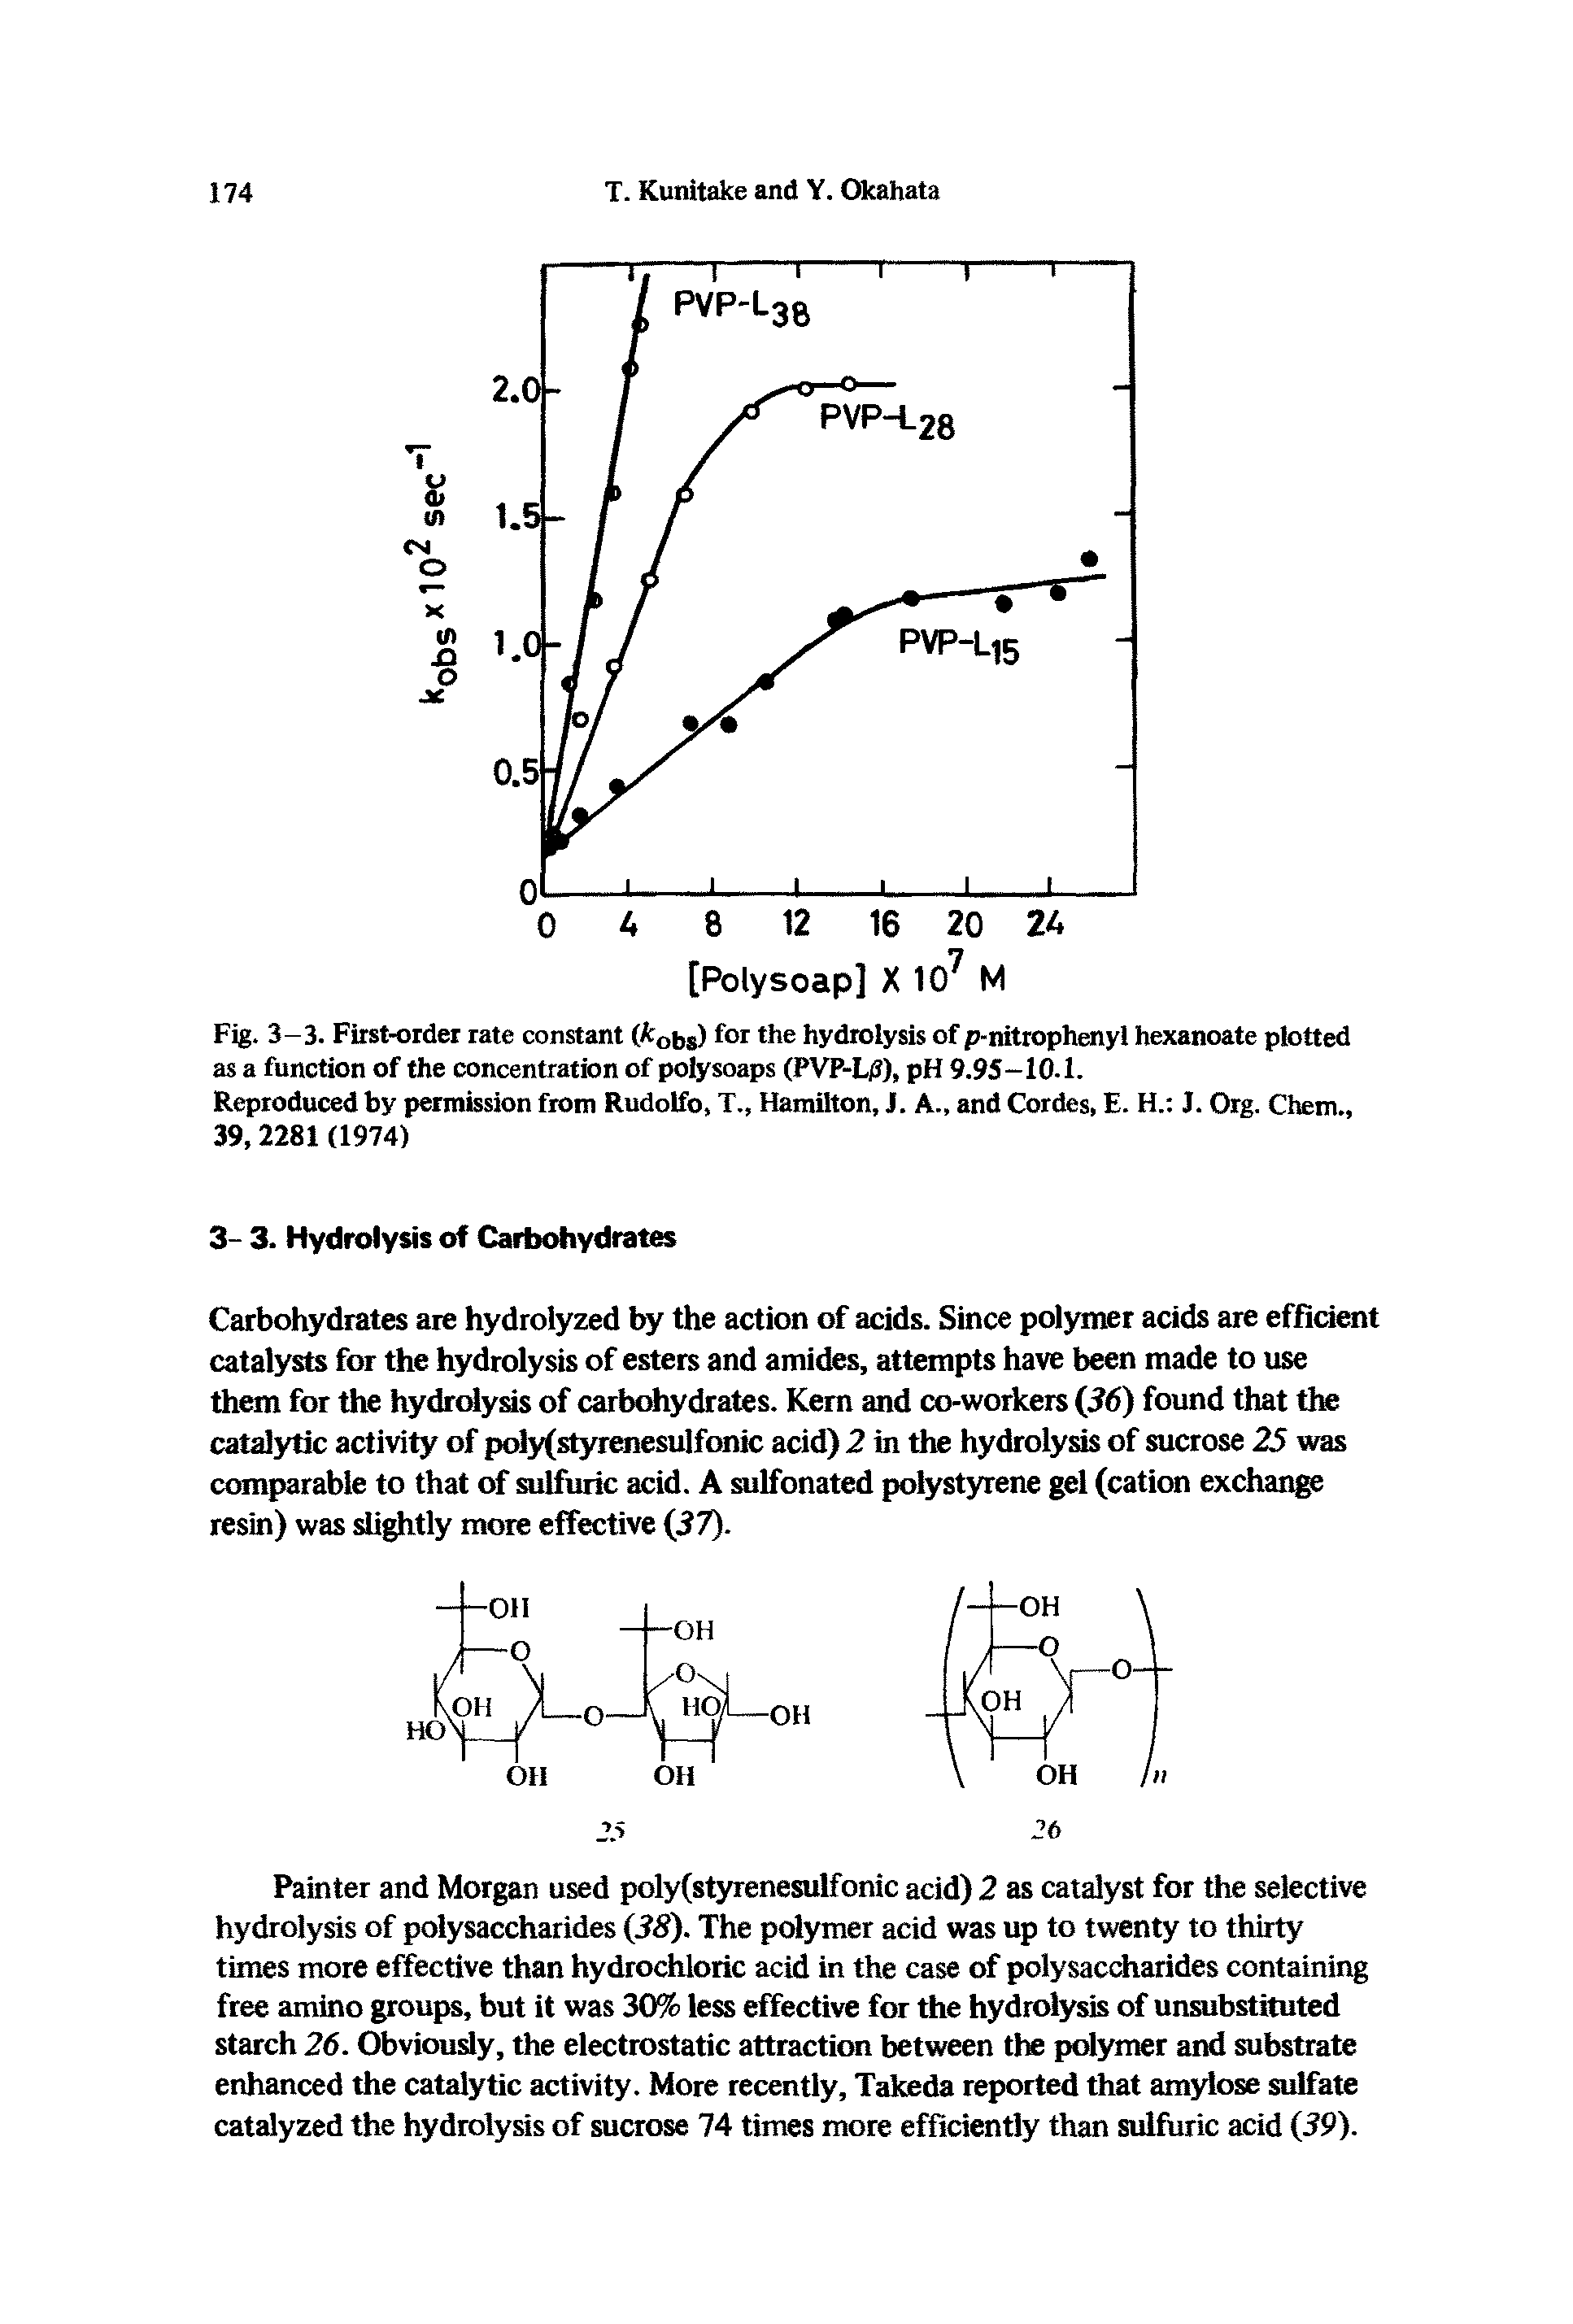 Fig. 3-3. First-order rate constant (kobs) hydrolysis of p-nitrophenyl hexanoate pk>tted as a function of the concentration of polysoaps (PVP-LiJ), pH 9.95-10.1.